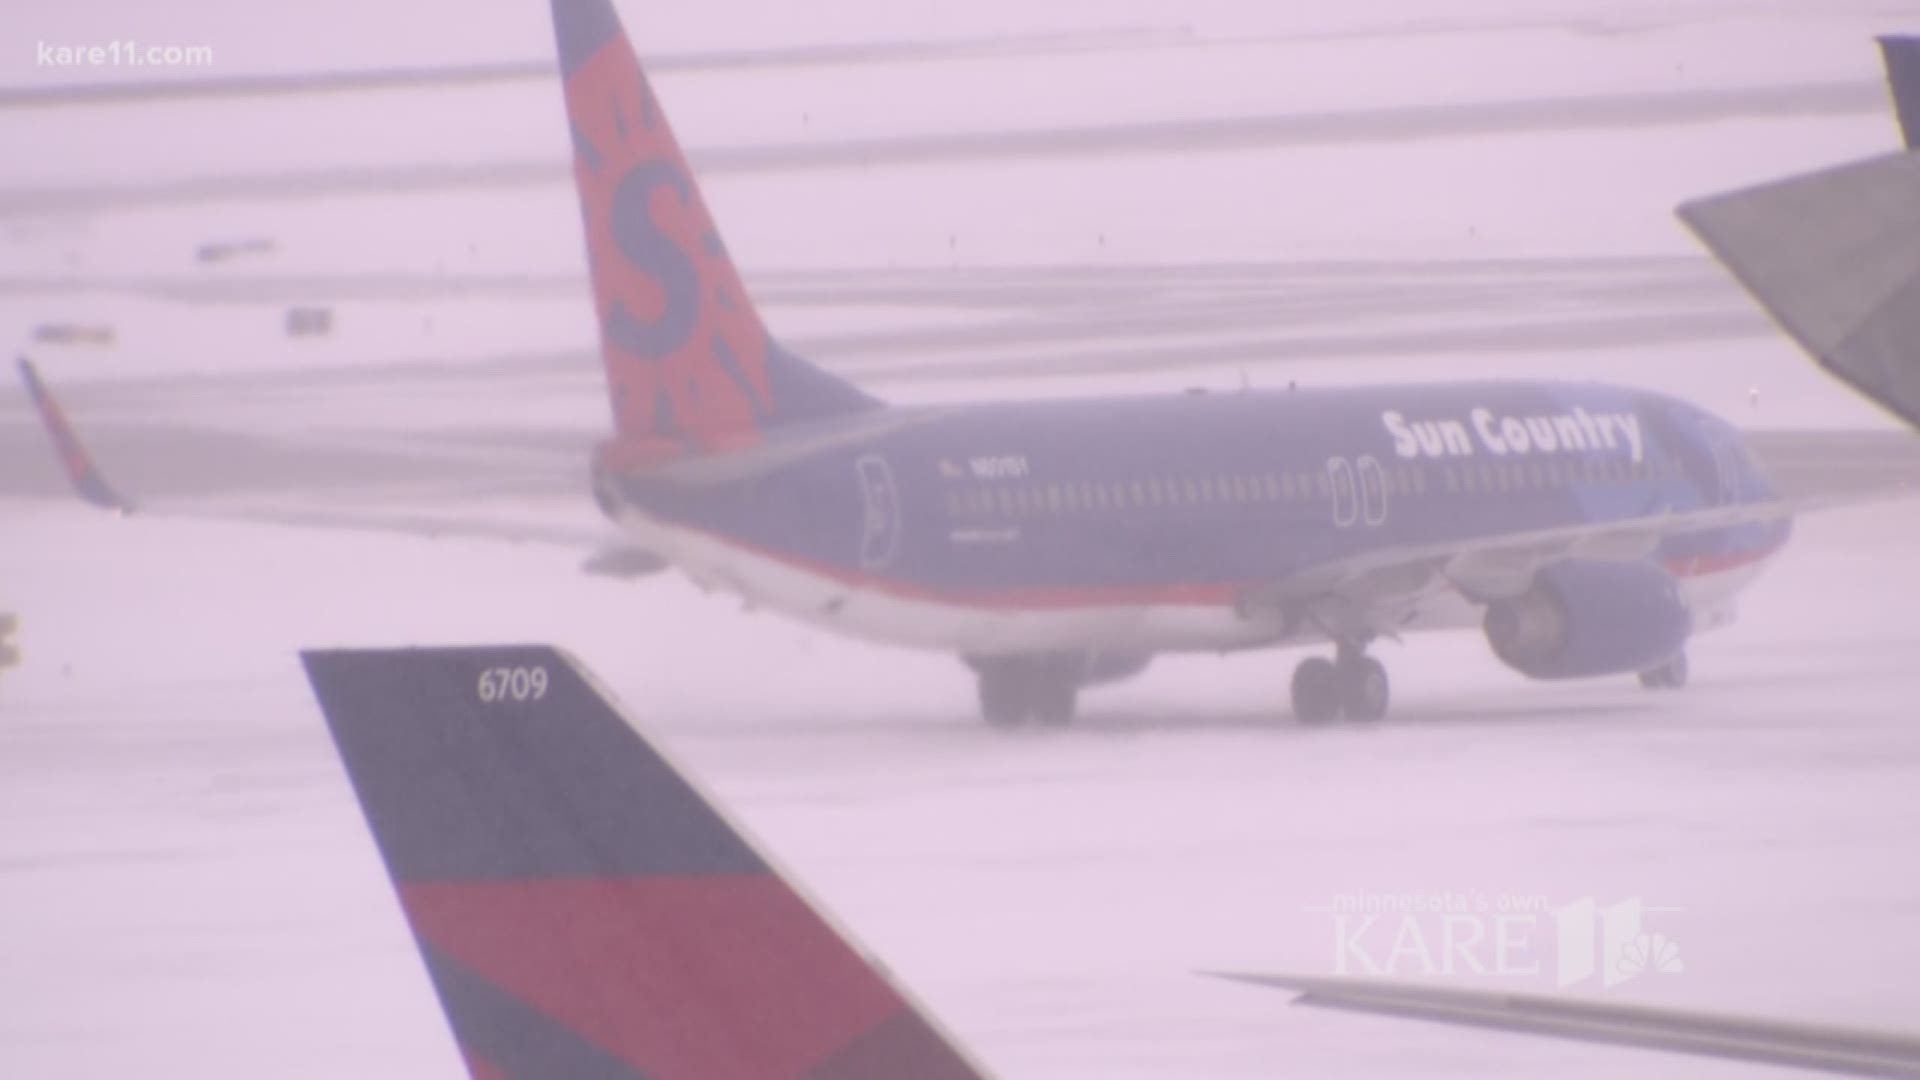 Sun Country will refund some of the travel expenses of the passengers who were stranded following last weekend's blizzard. https://kare11.tv/2H8DrDC